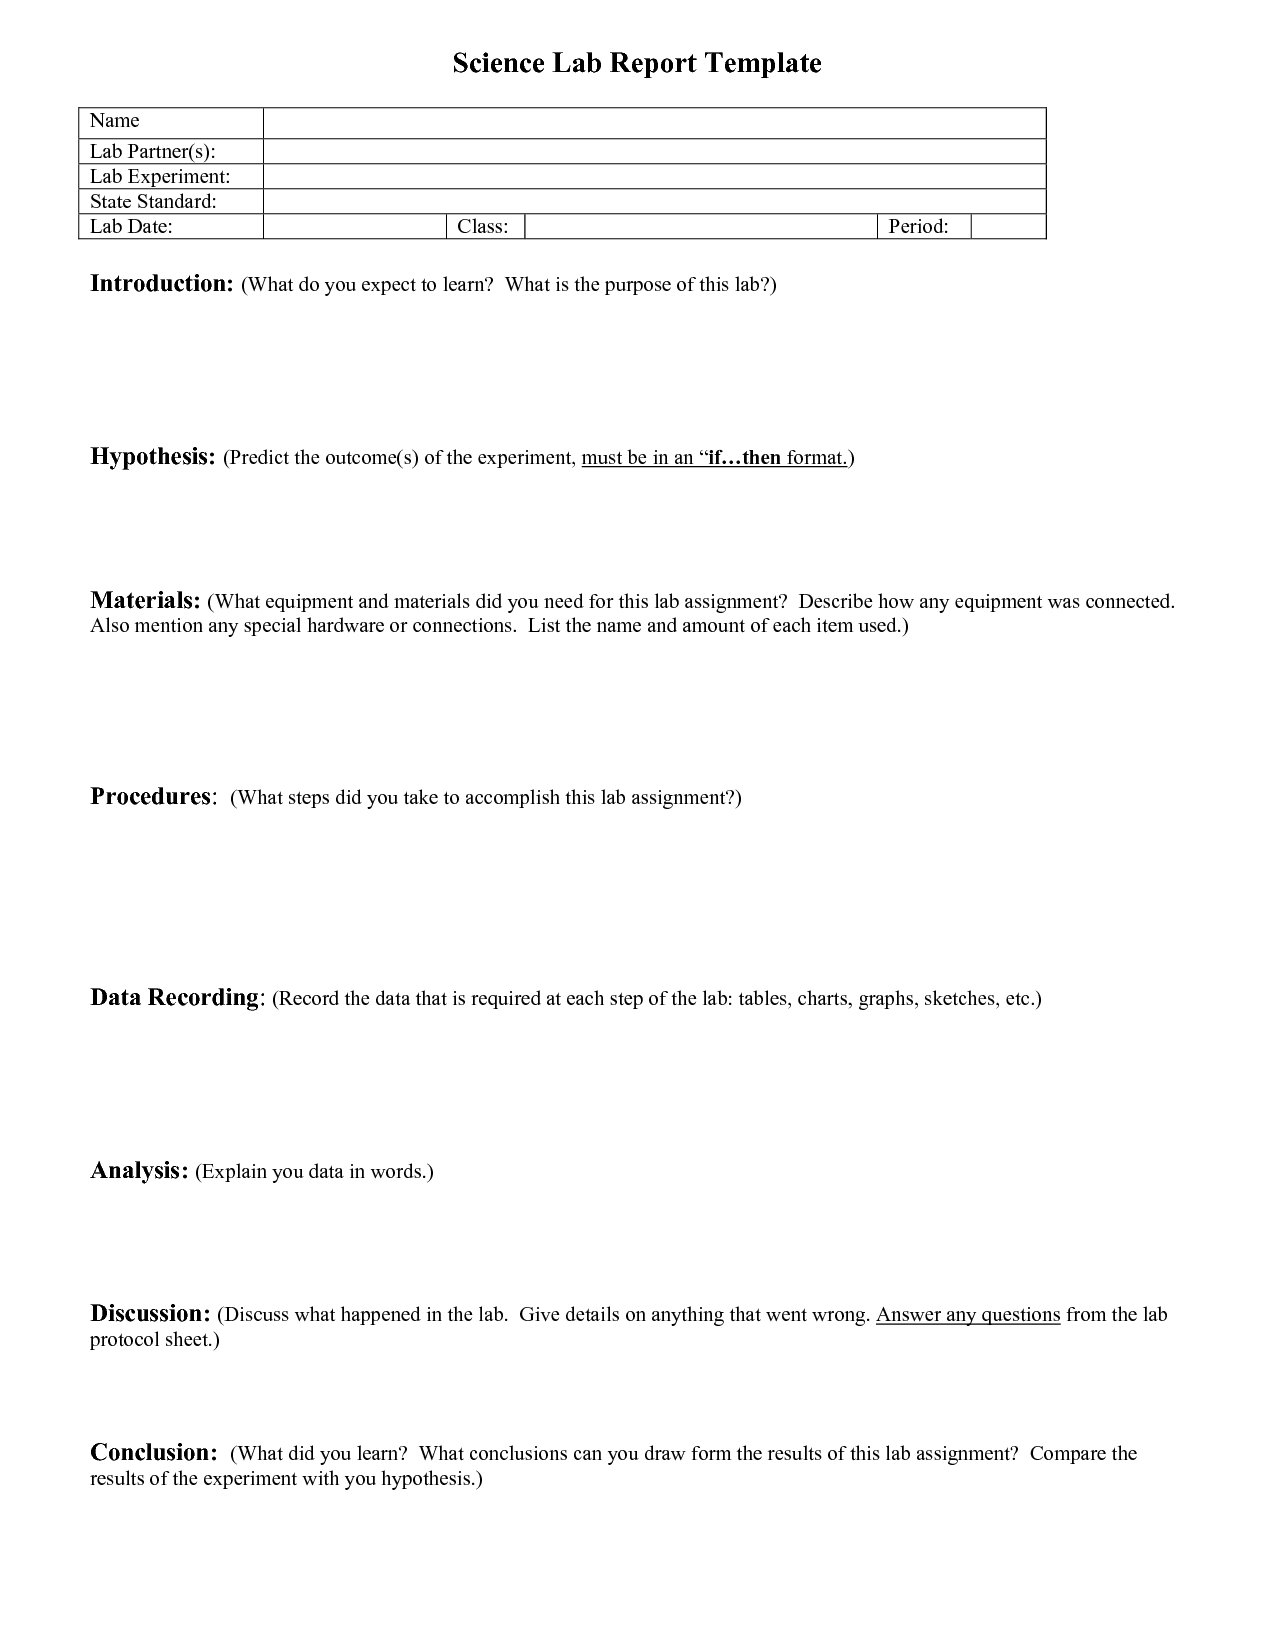 Lab Report Outline | Science Lab Report Template | School Inside Science Experiment Report Template